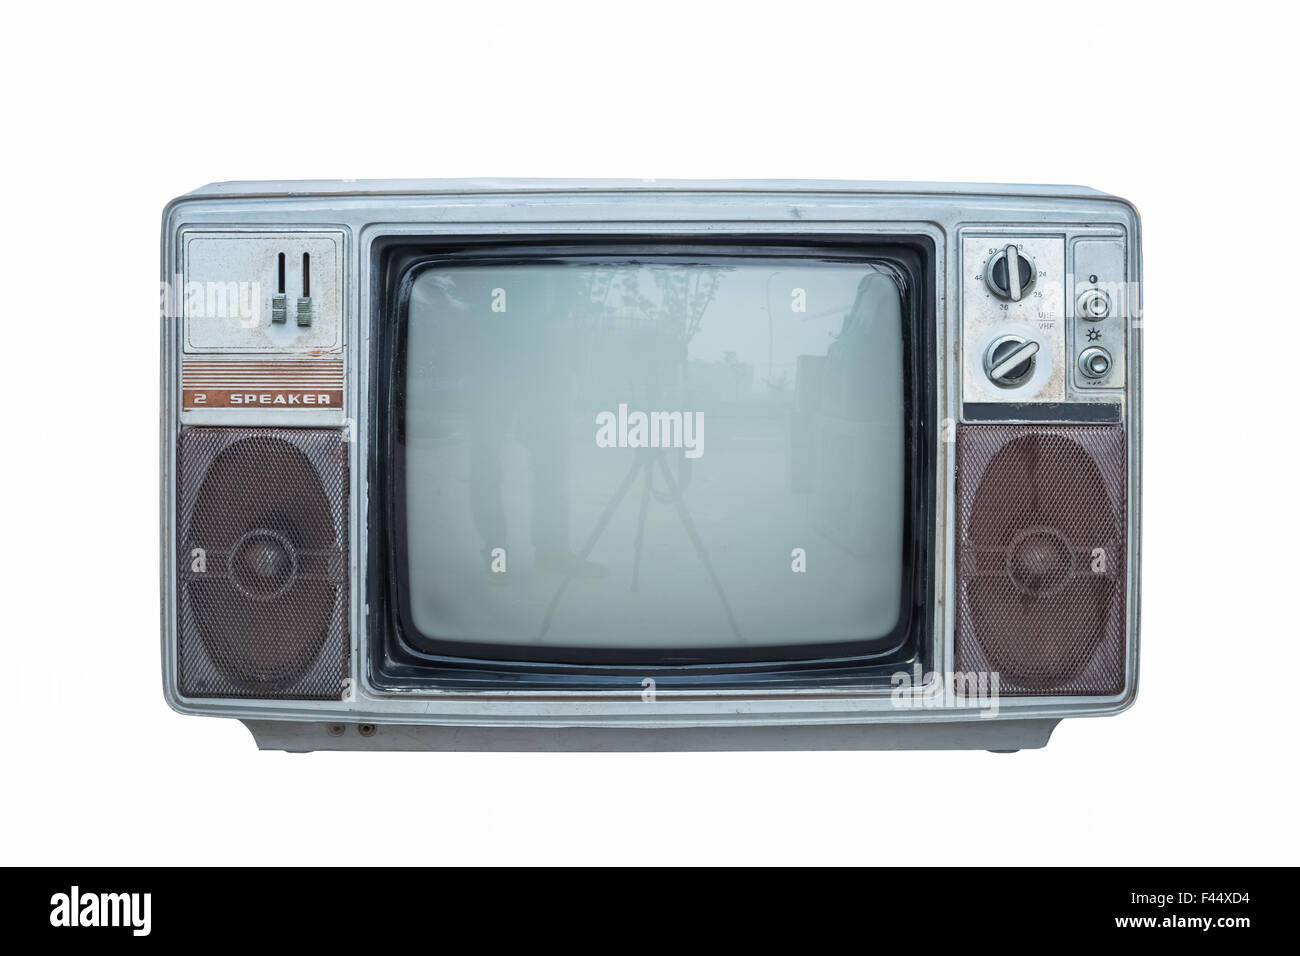 old black and white television Stock Photo